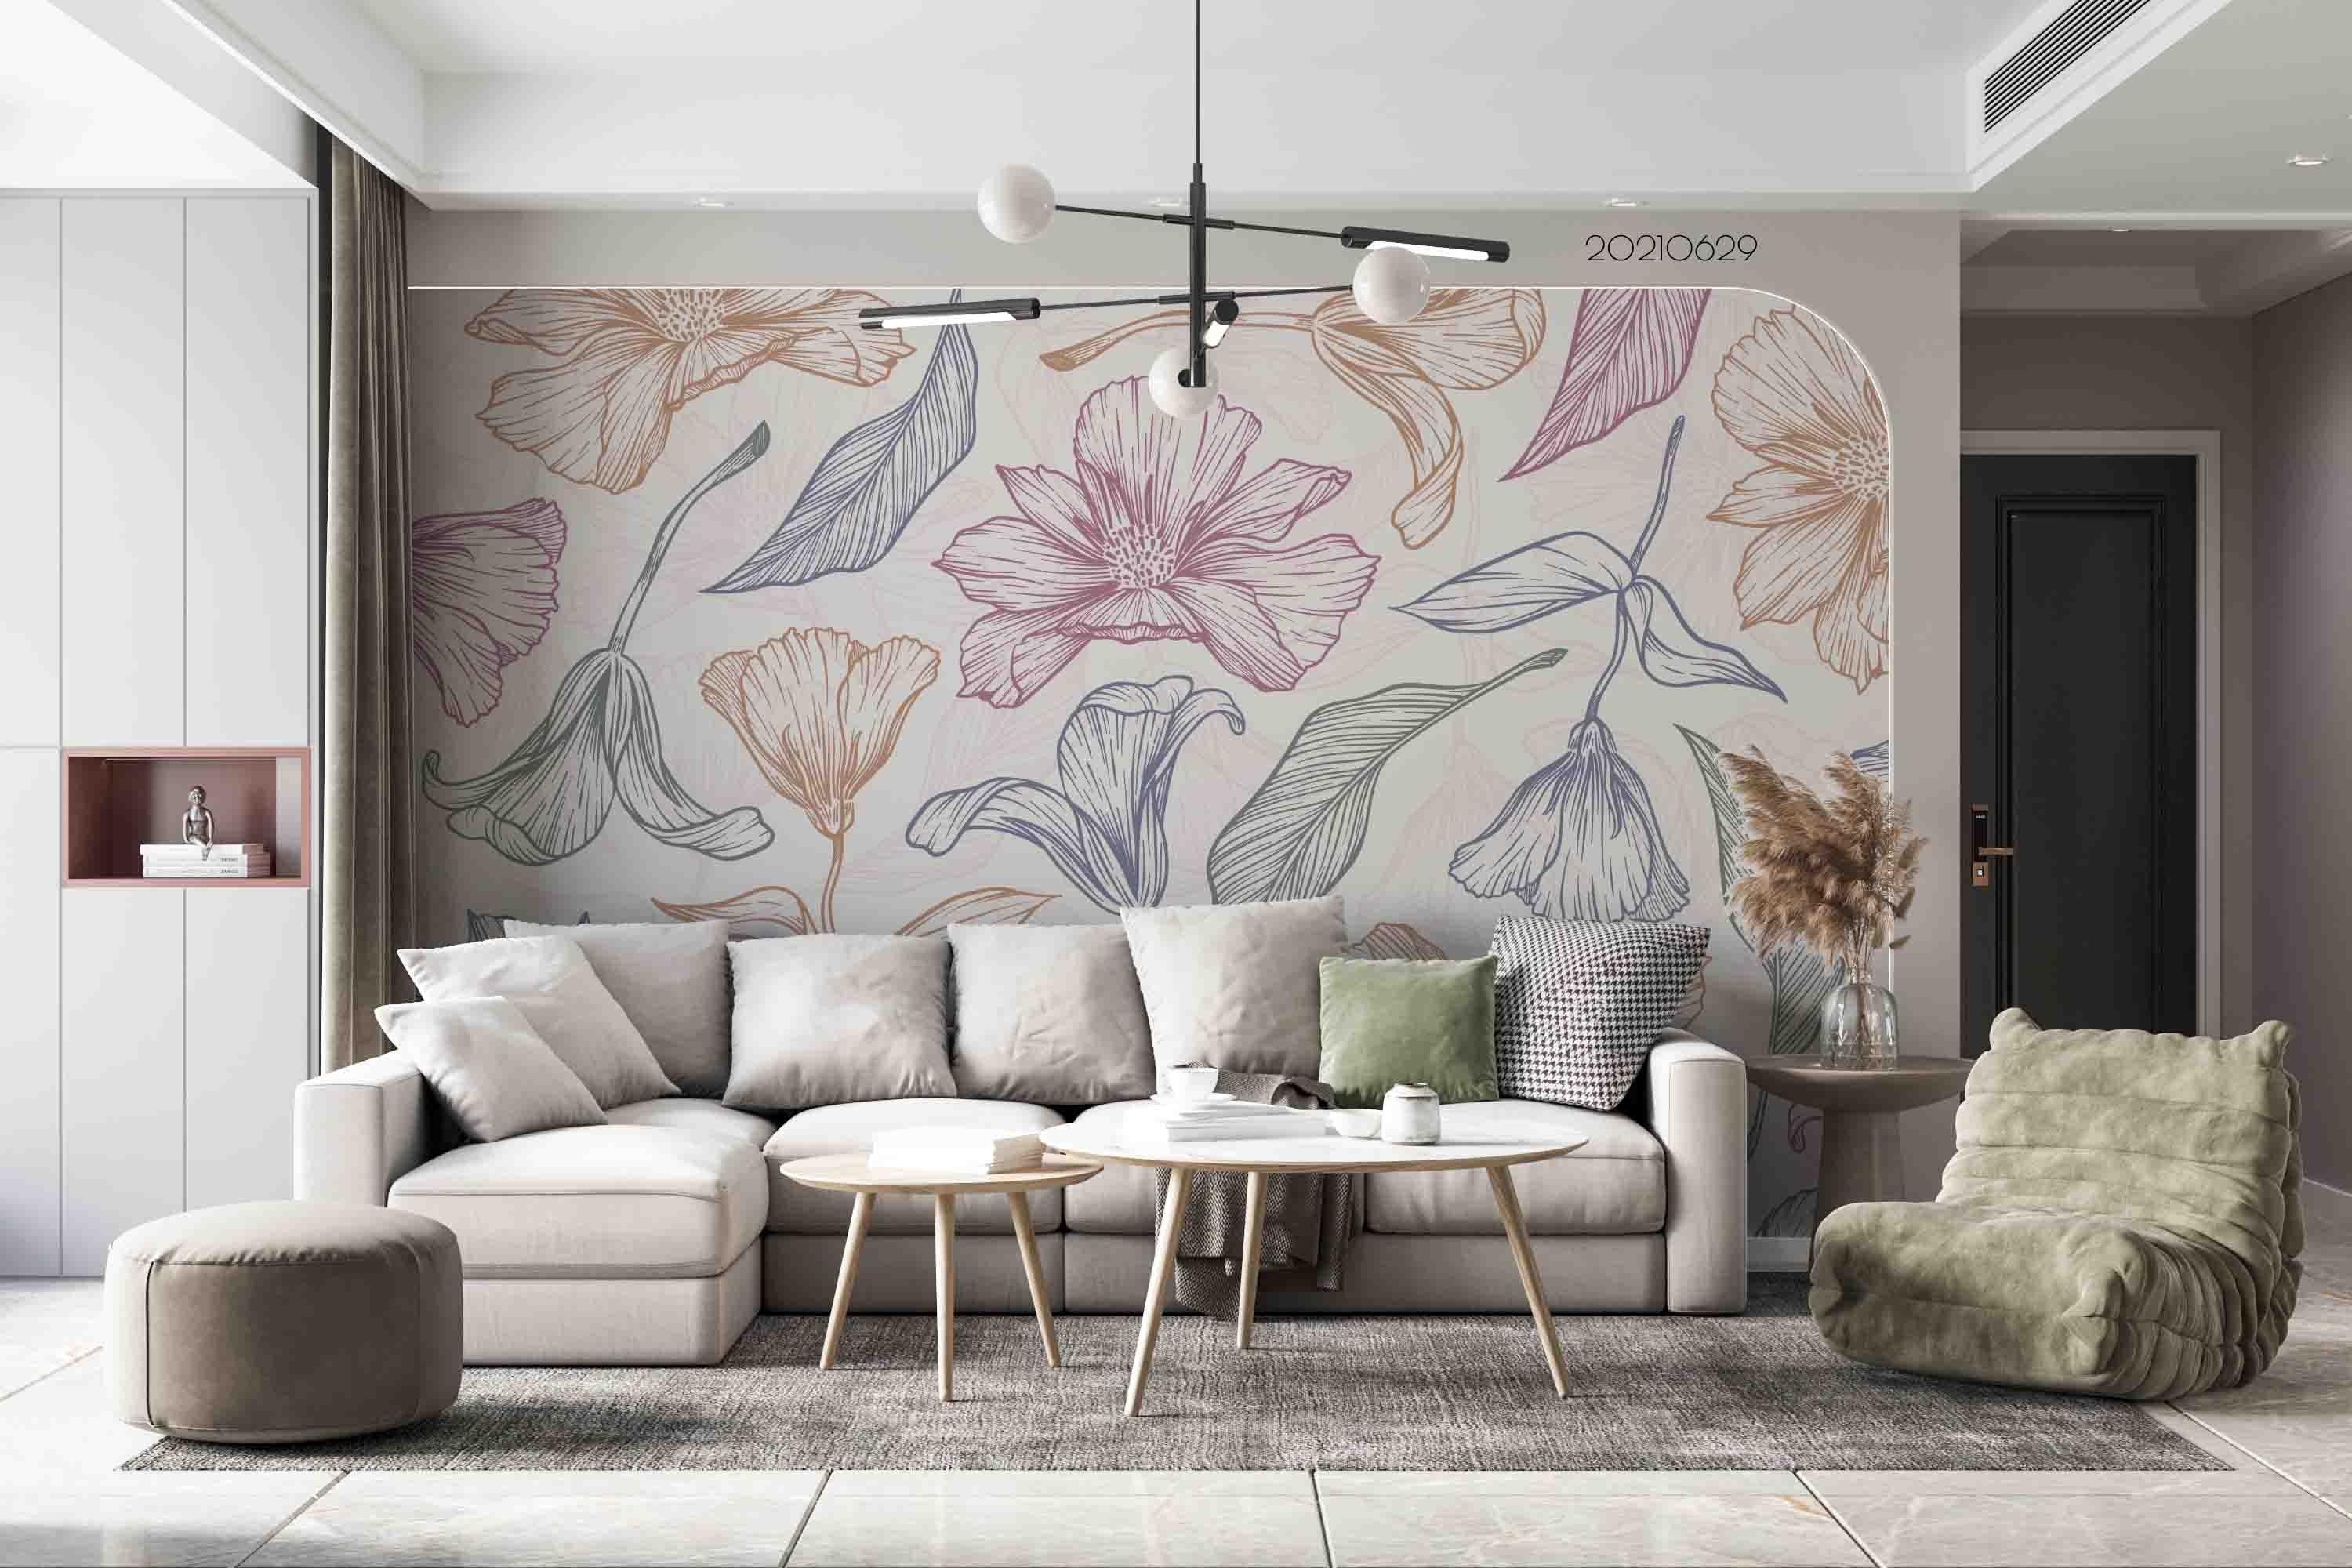 3D Hand Drawn Floral Leaves Wall Mural Wallpaper LQH 24- Jess Art Decoration